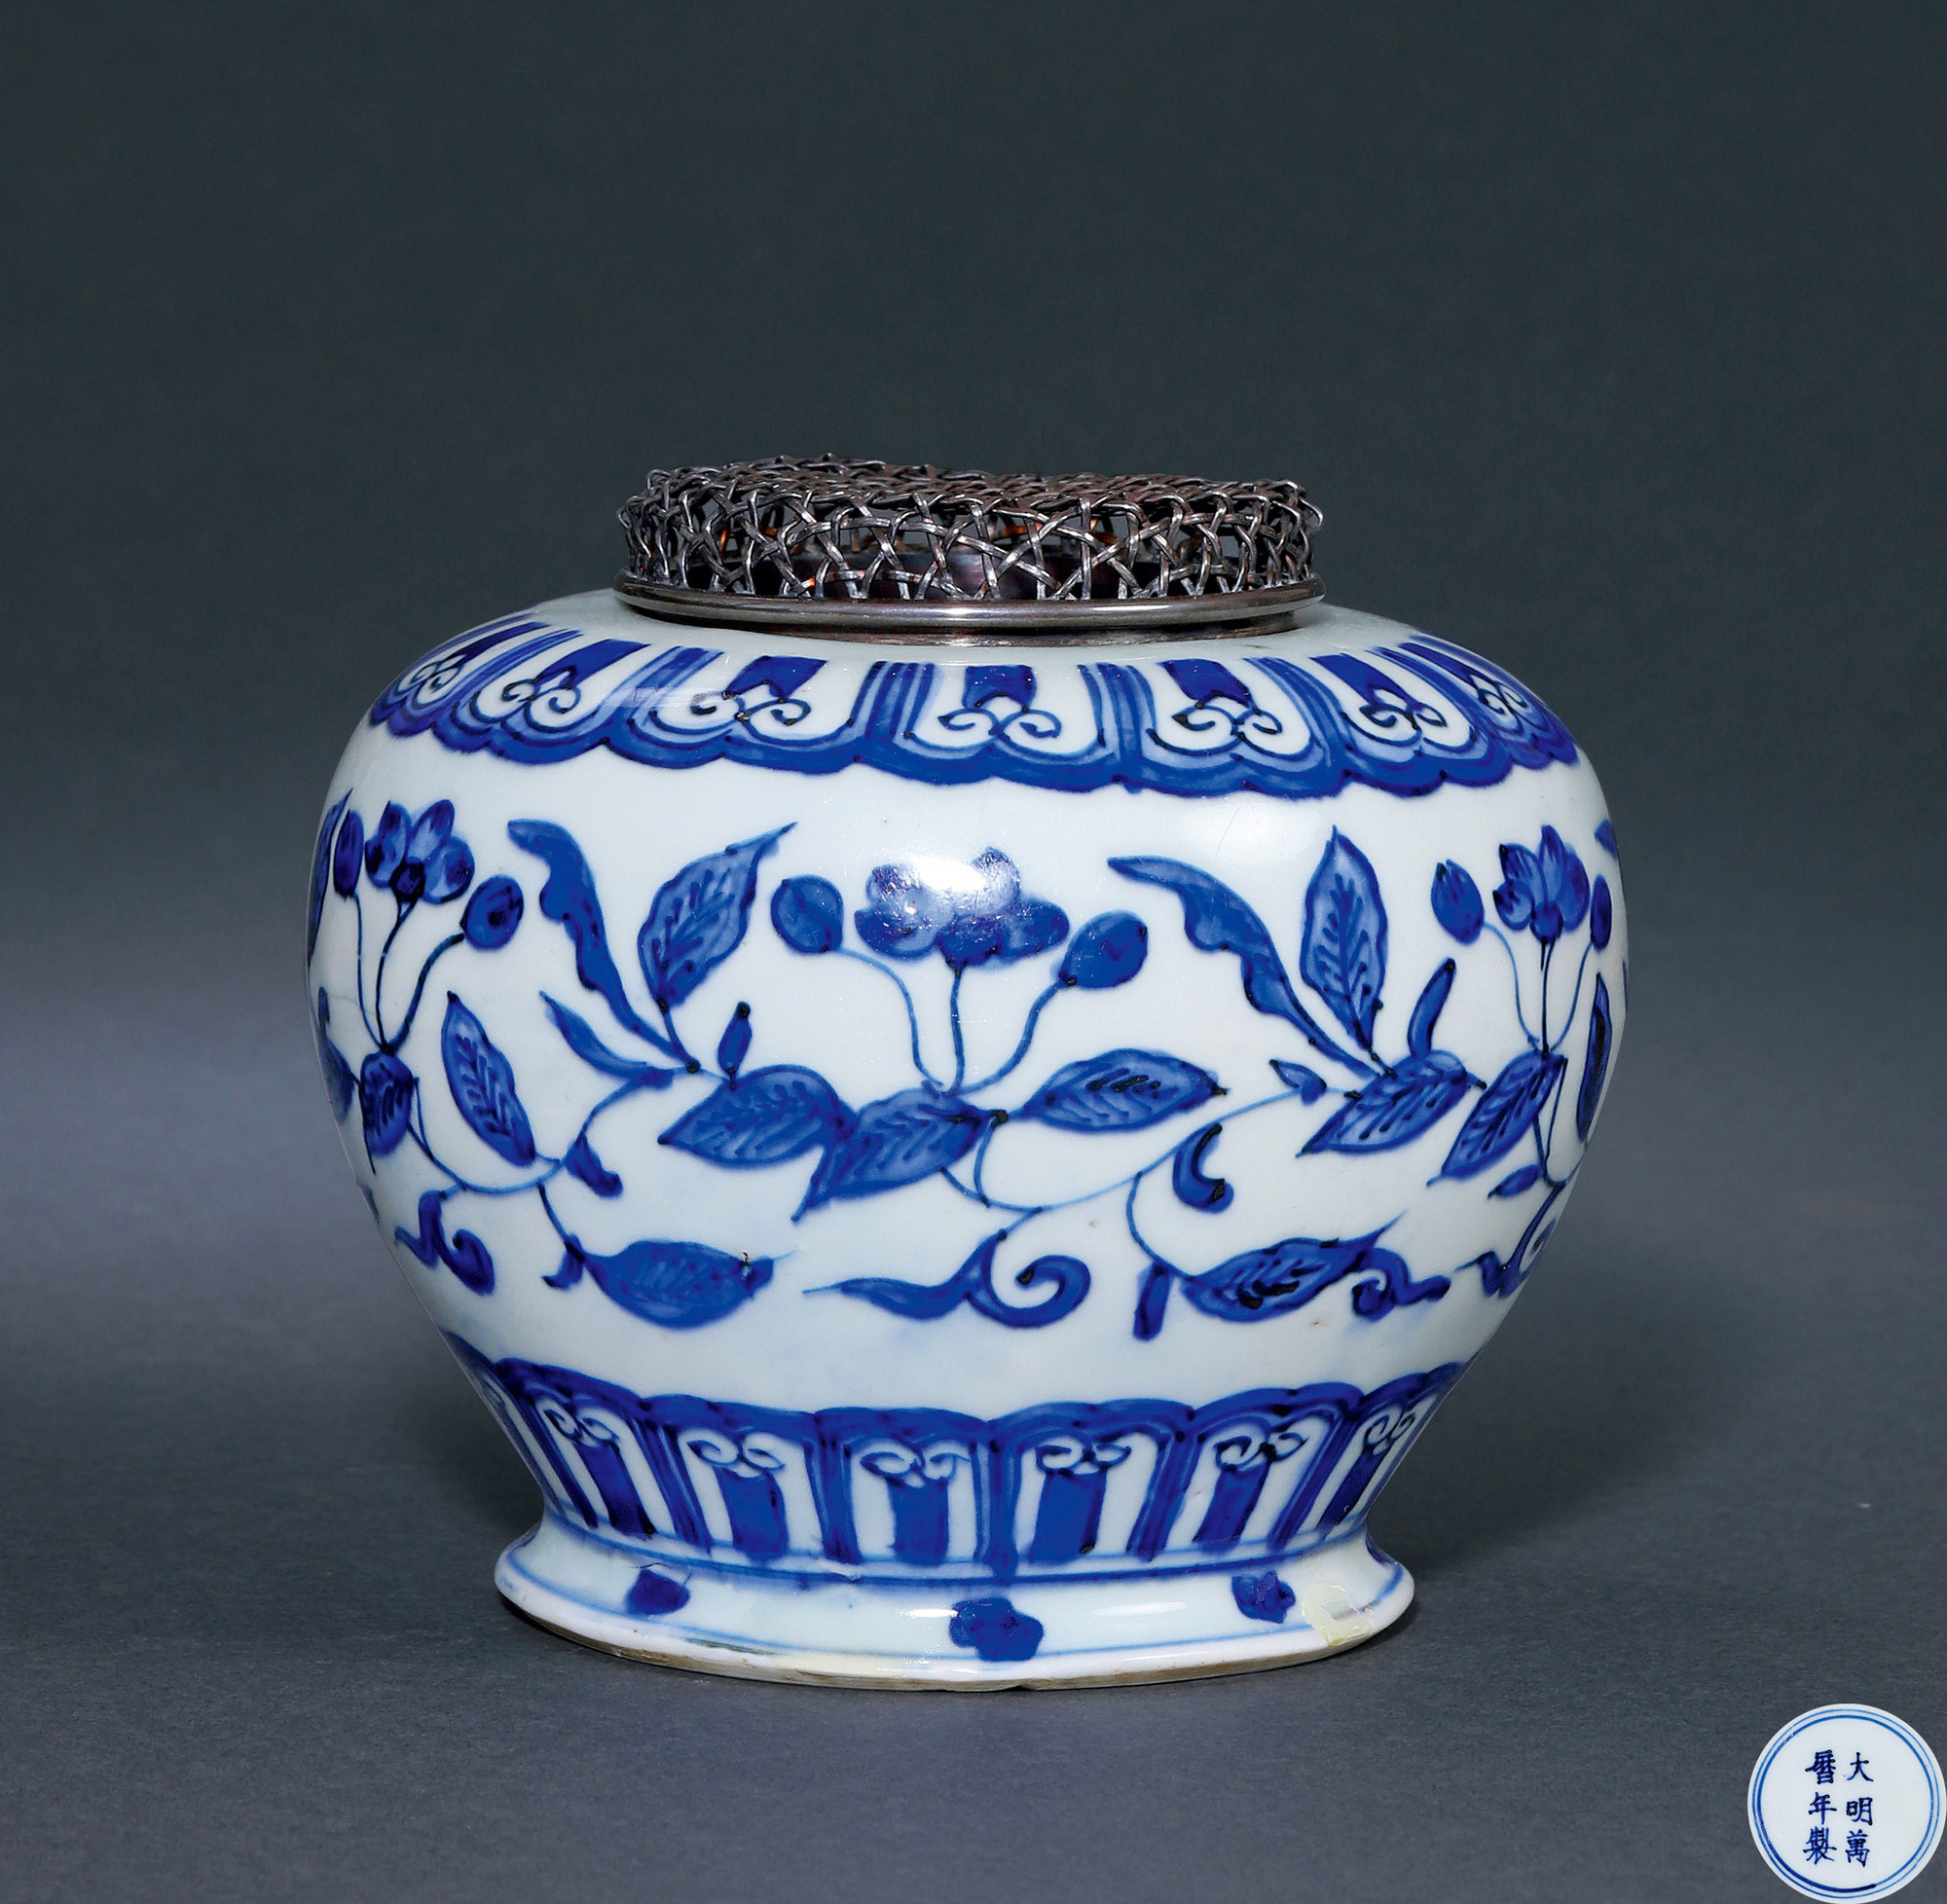 A BLUE AND WHITE JAR WITH FLOWER DESIGN